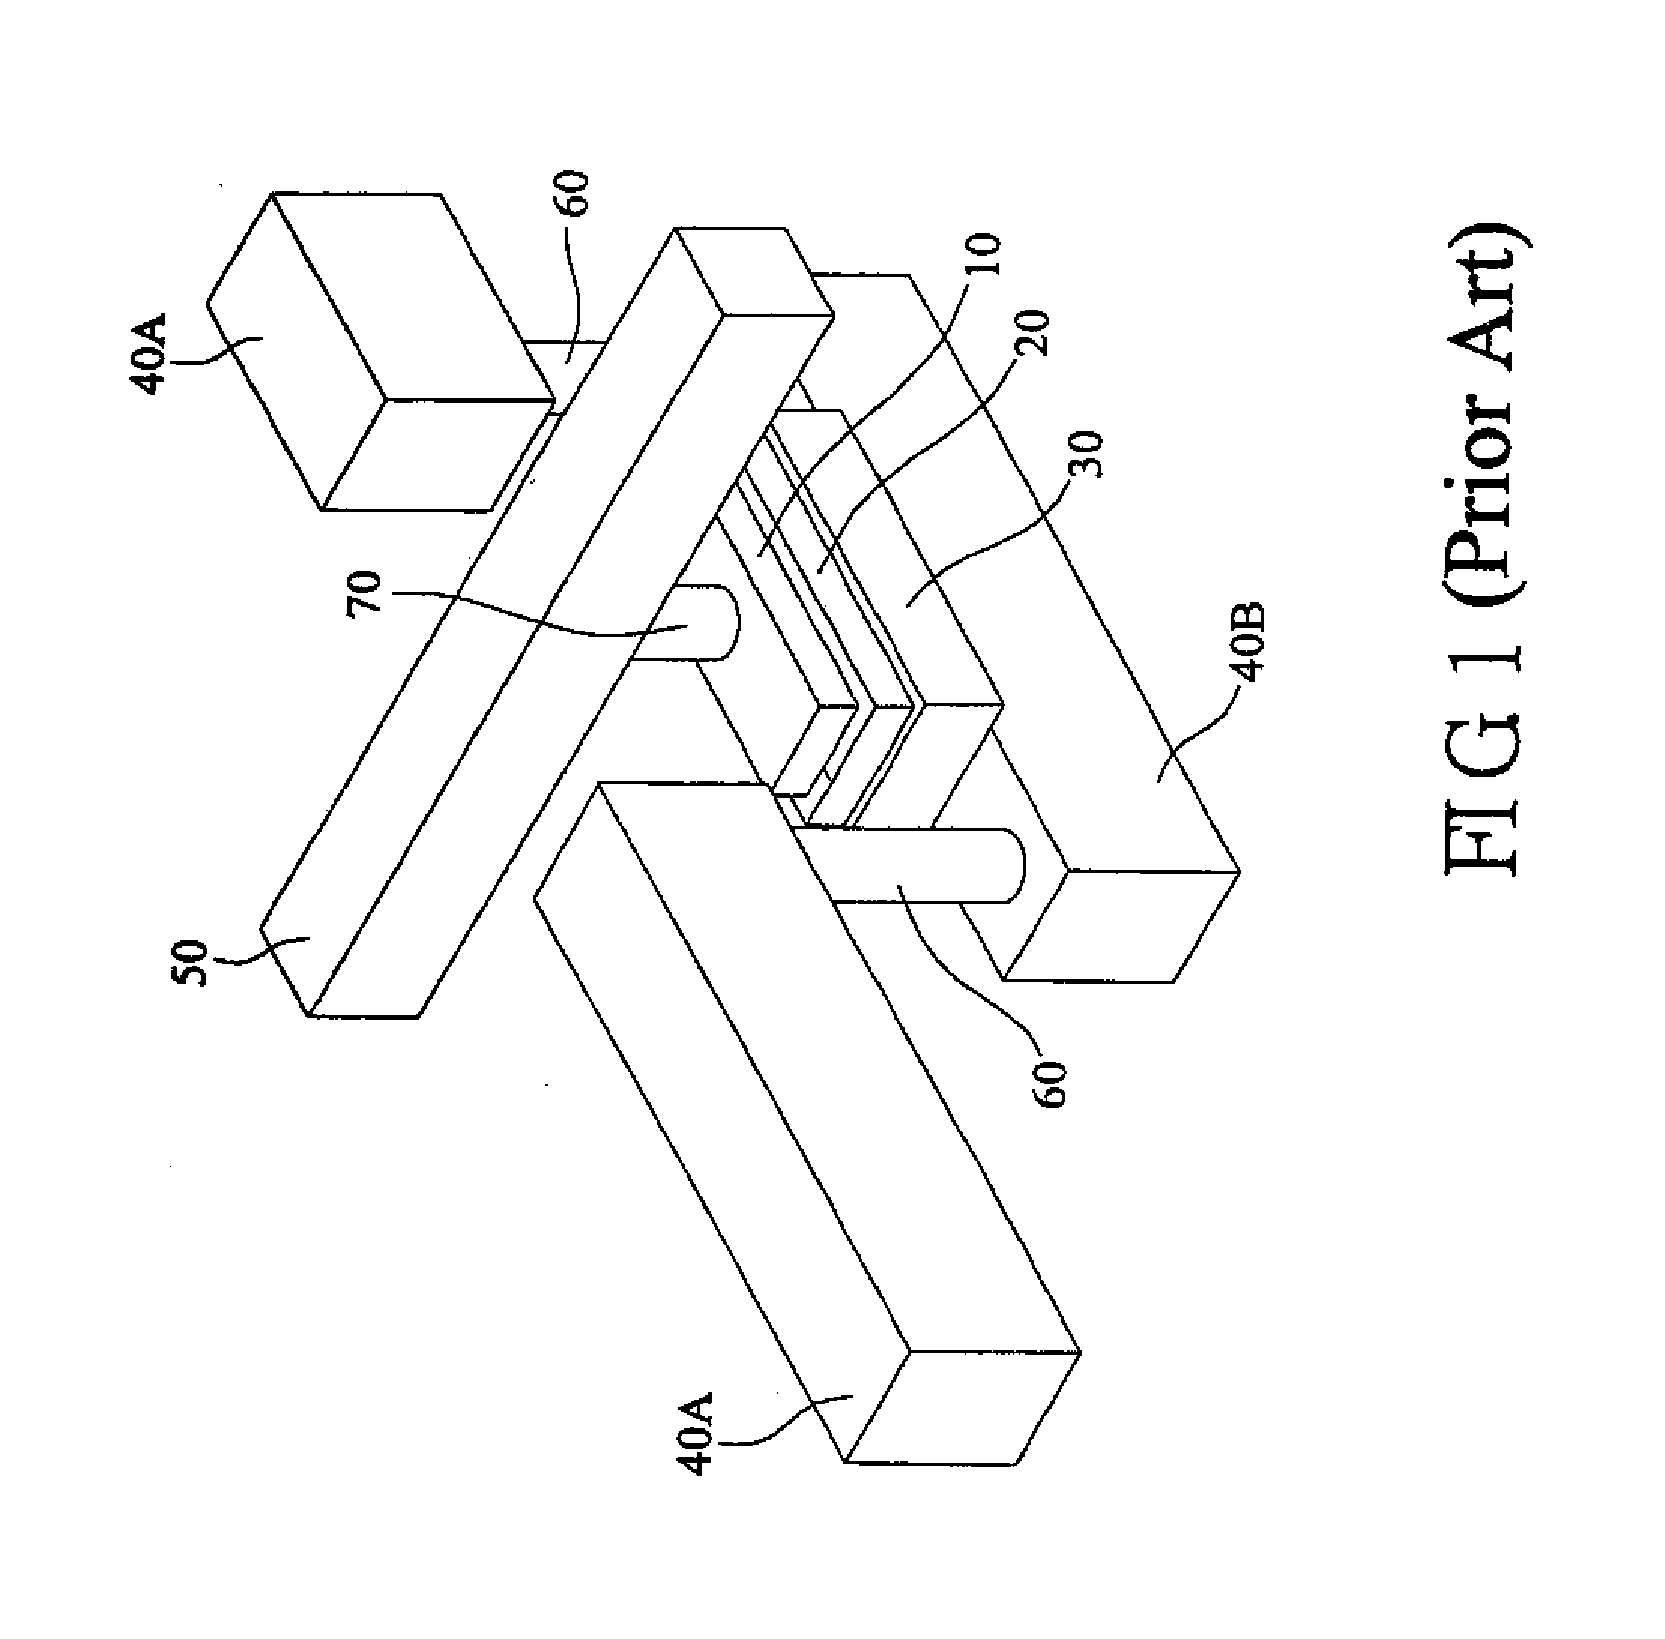 High write selectivity and low power magnetic random access memory and method for fabricating the same